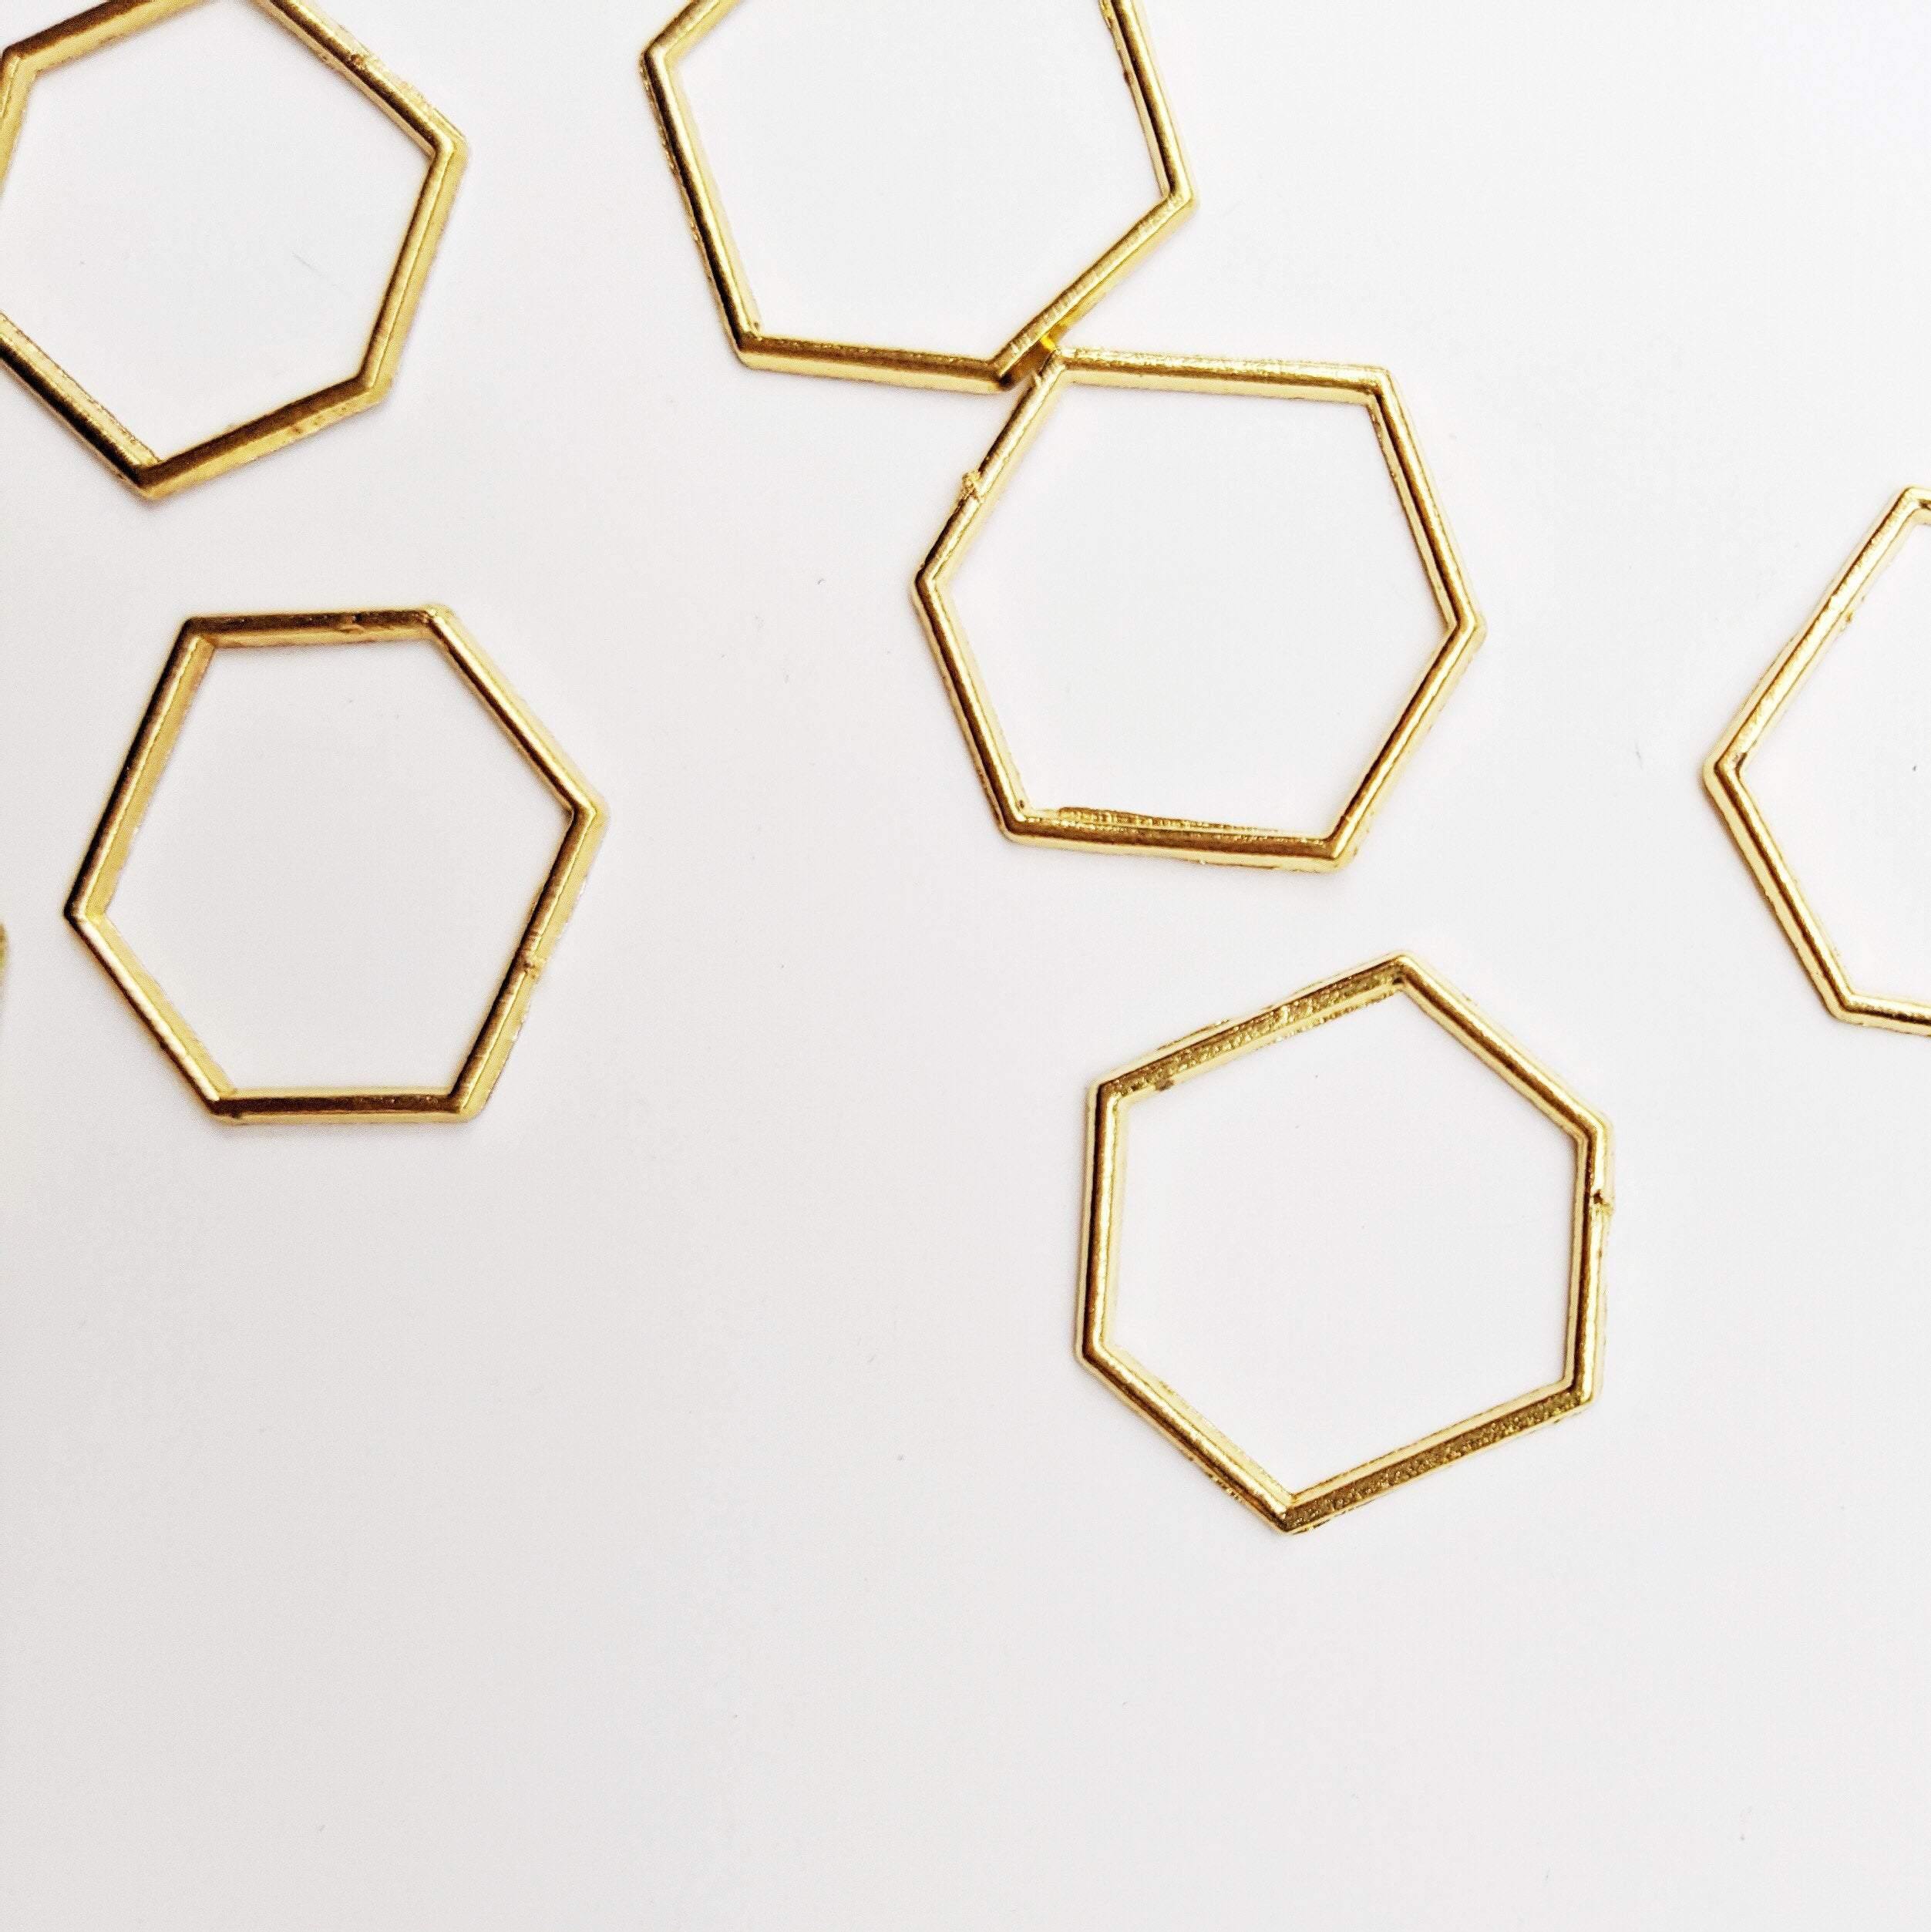 Gold hexagon linking ring - 8 pieces - Poethan